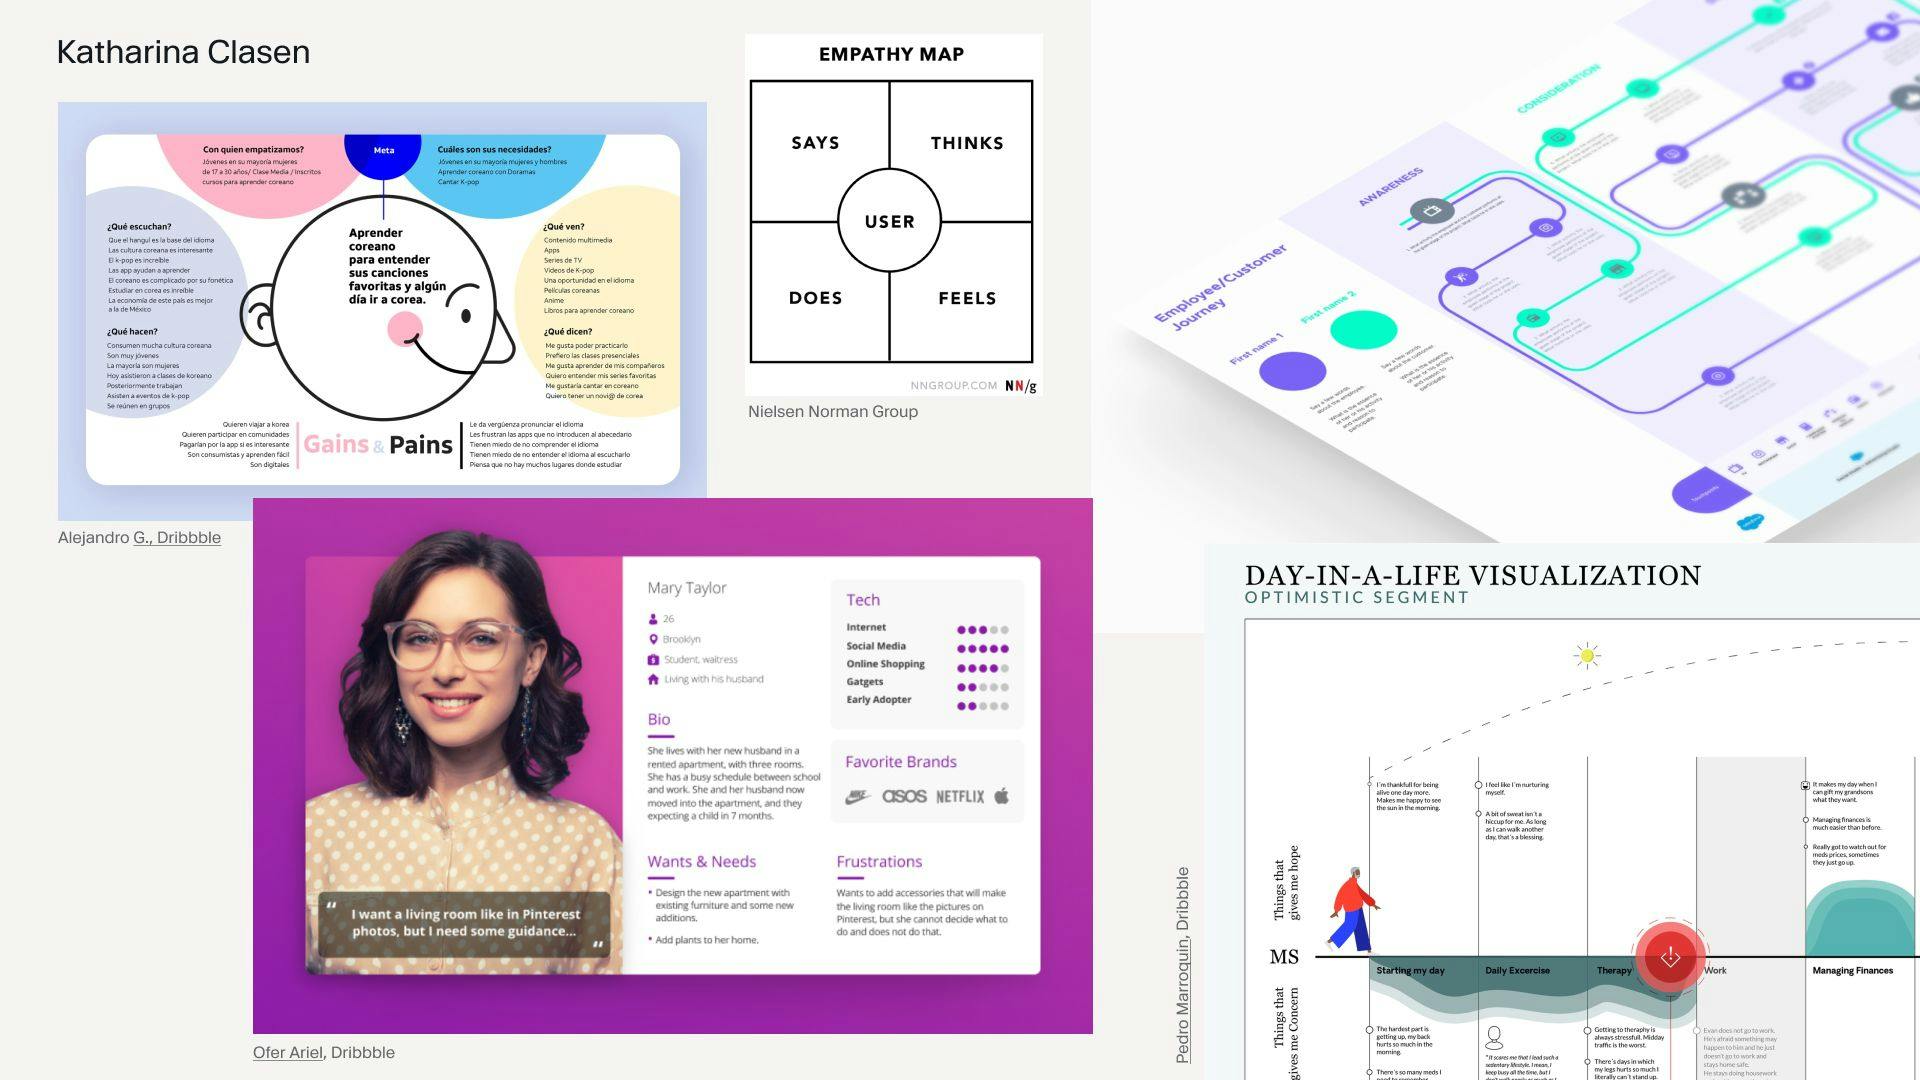 Some of the most popular tools we use in design are personas, empathy maps, stakeholder maps, scenarios, storyboards, journey maps, and so on. All of which is helping us empathize with human needs and understand the context of use